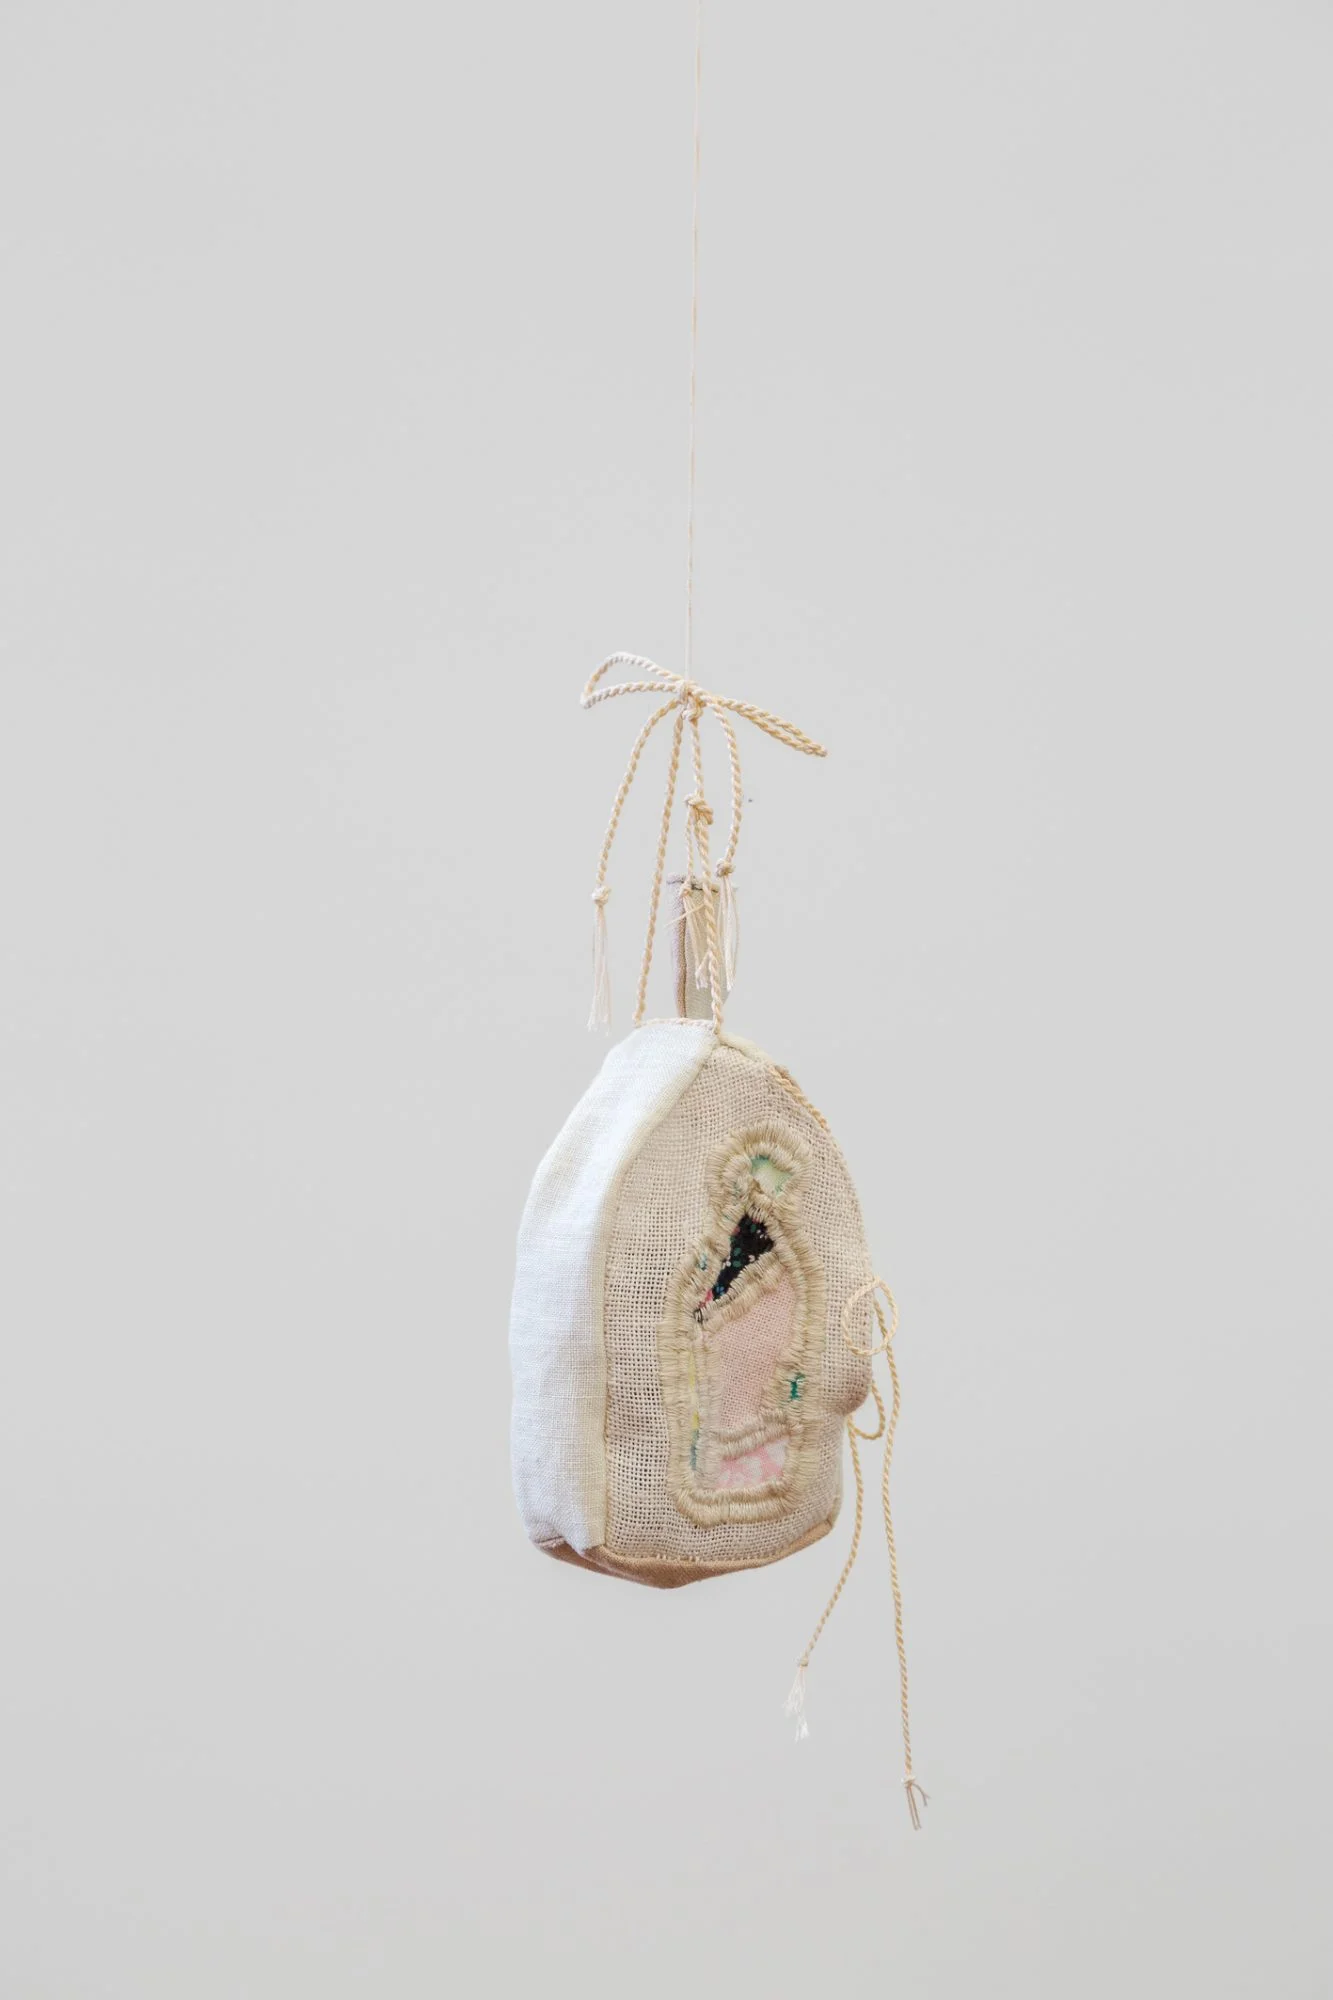 Snapcat (Renae Coles & Anna Dunnill), Pockets to hold things we’ve been holding, 2021. Image courtesy of the artists. Photography Christo Crocker.